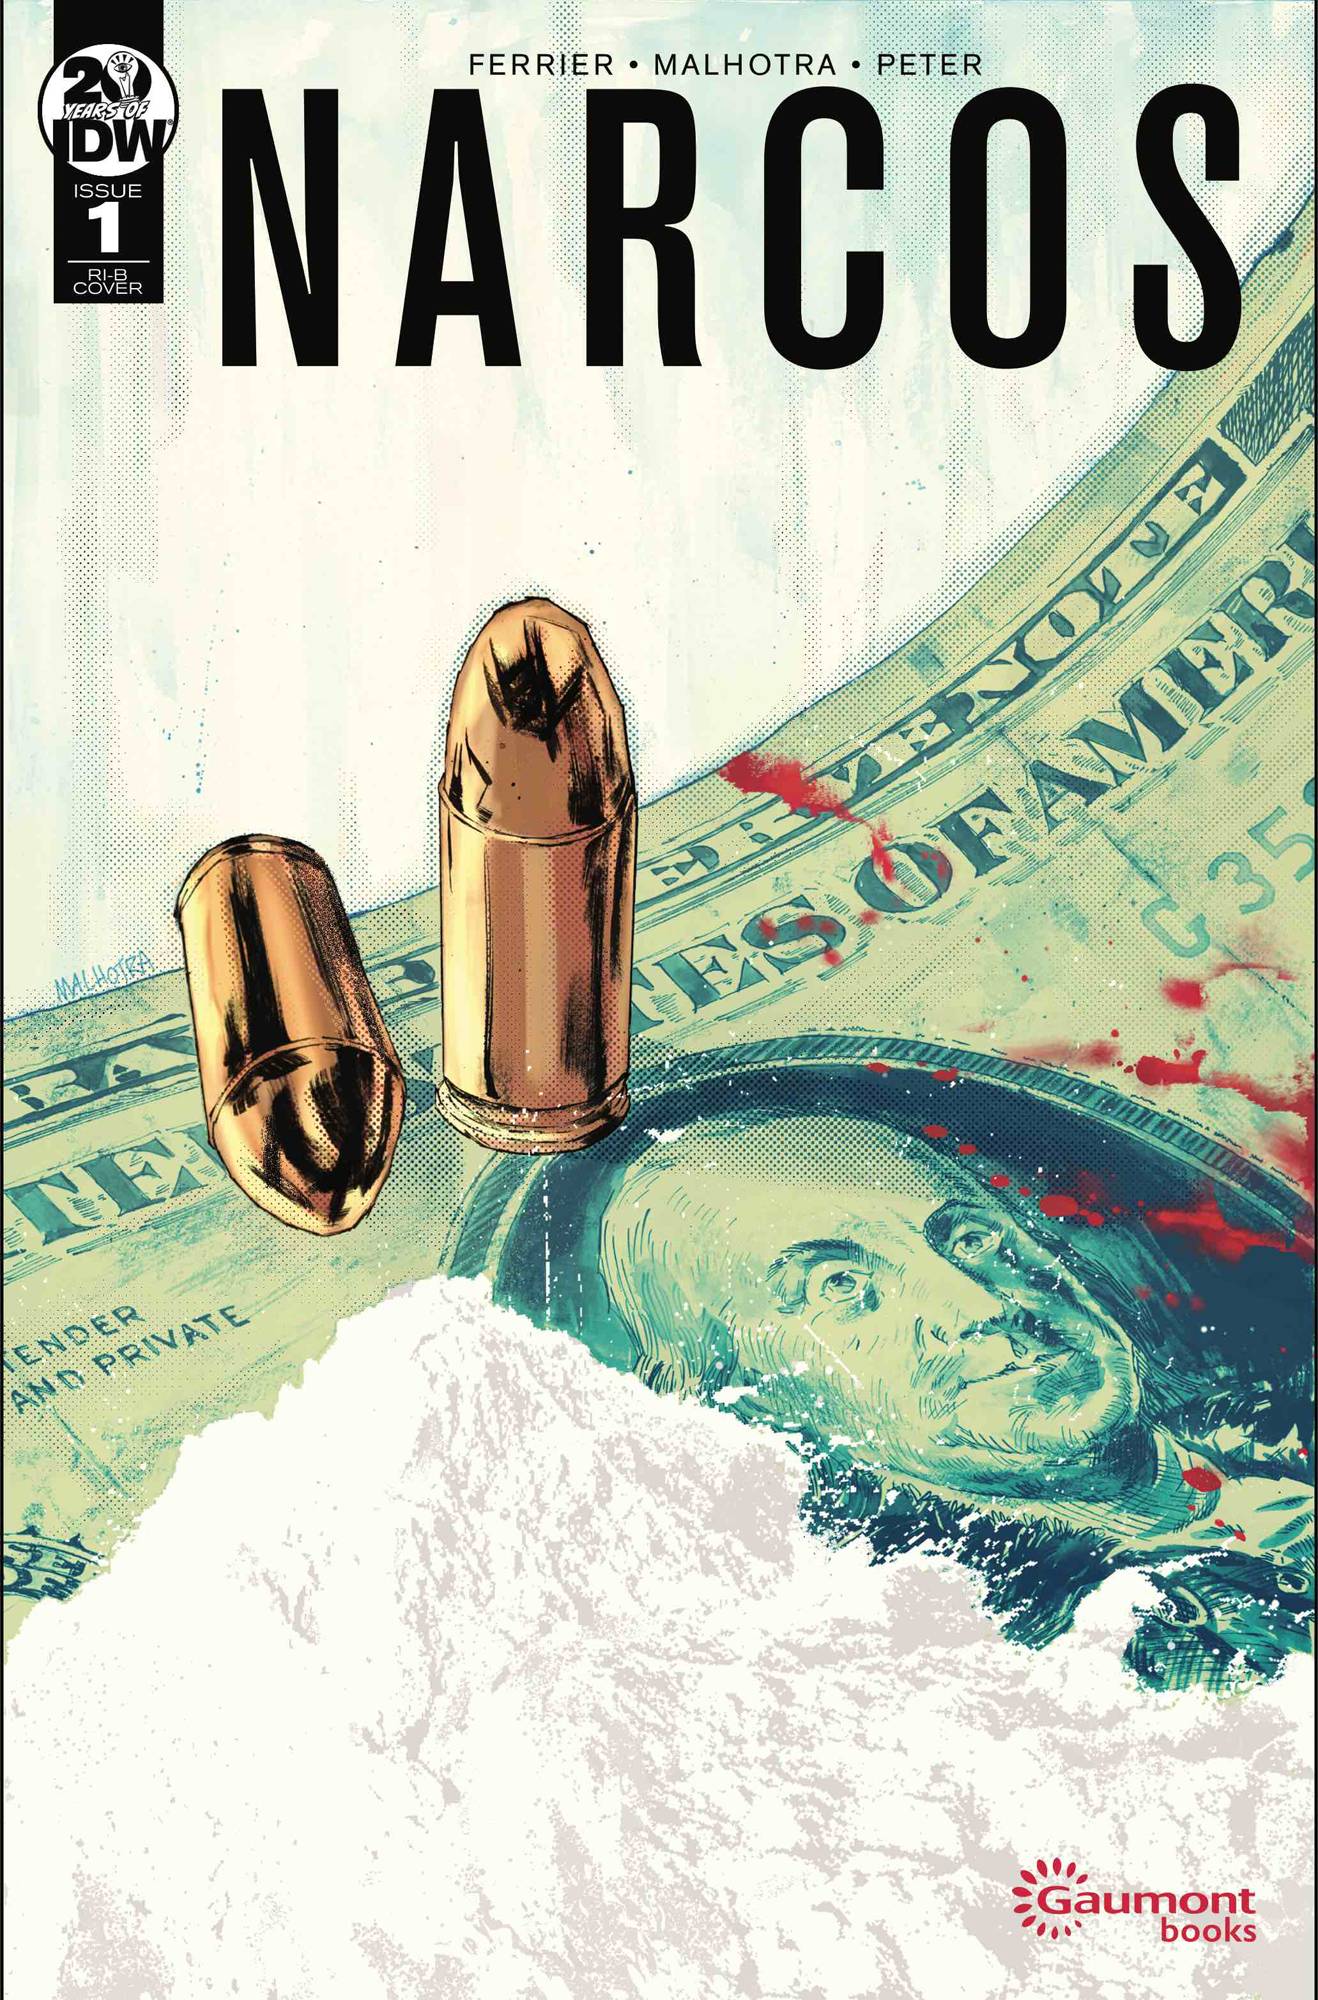 Narcos #1 1 for 25 Incentive Malhotra (Of 4)